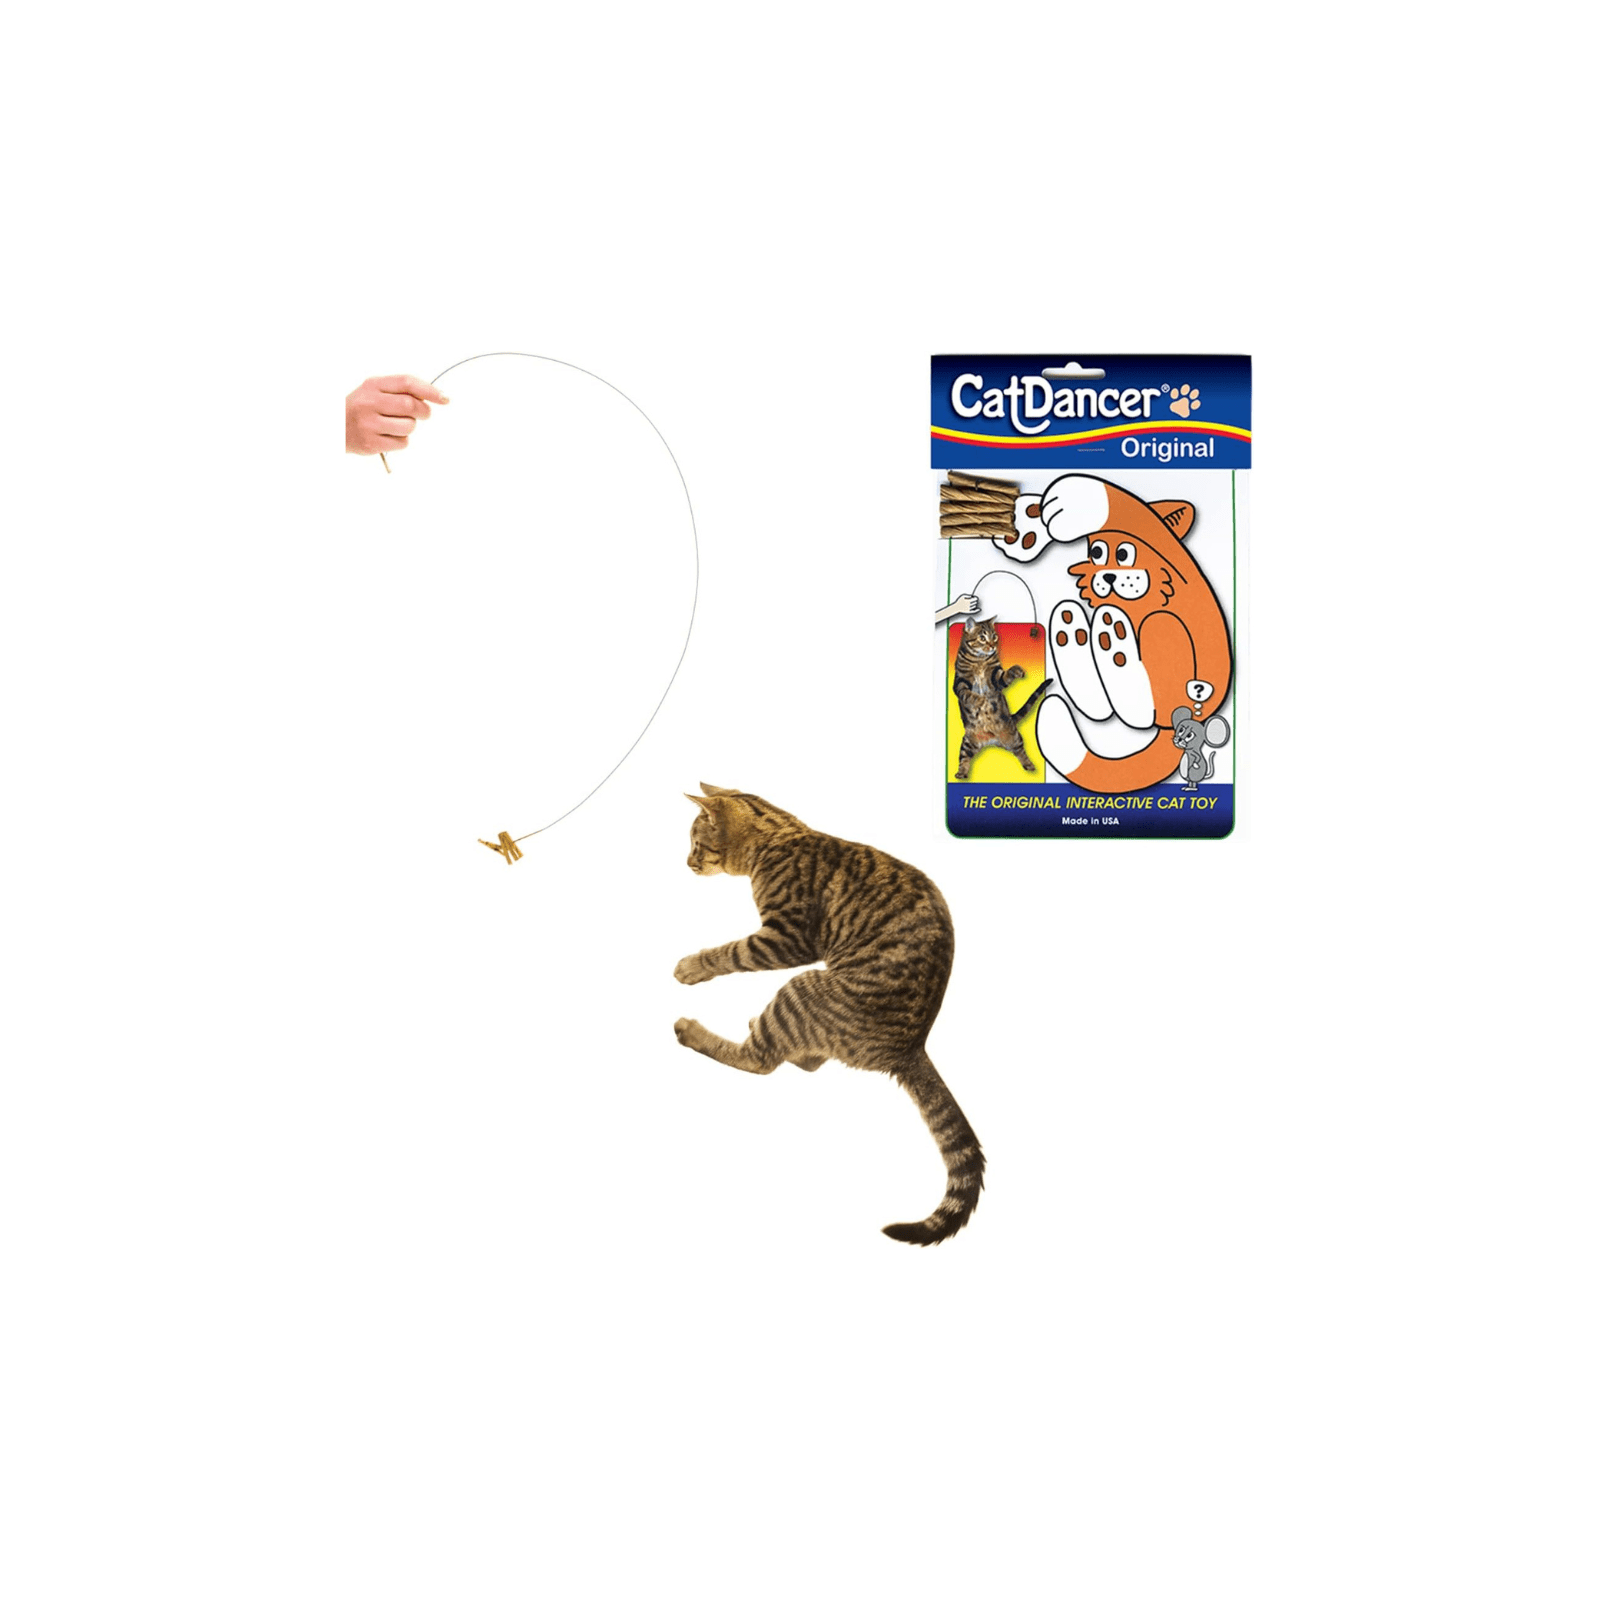 Cat Dancer Products